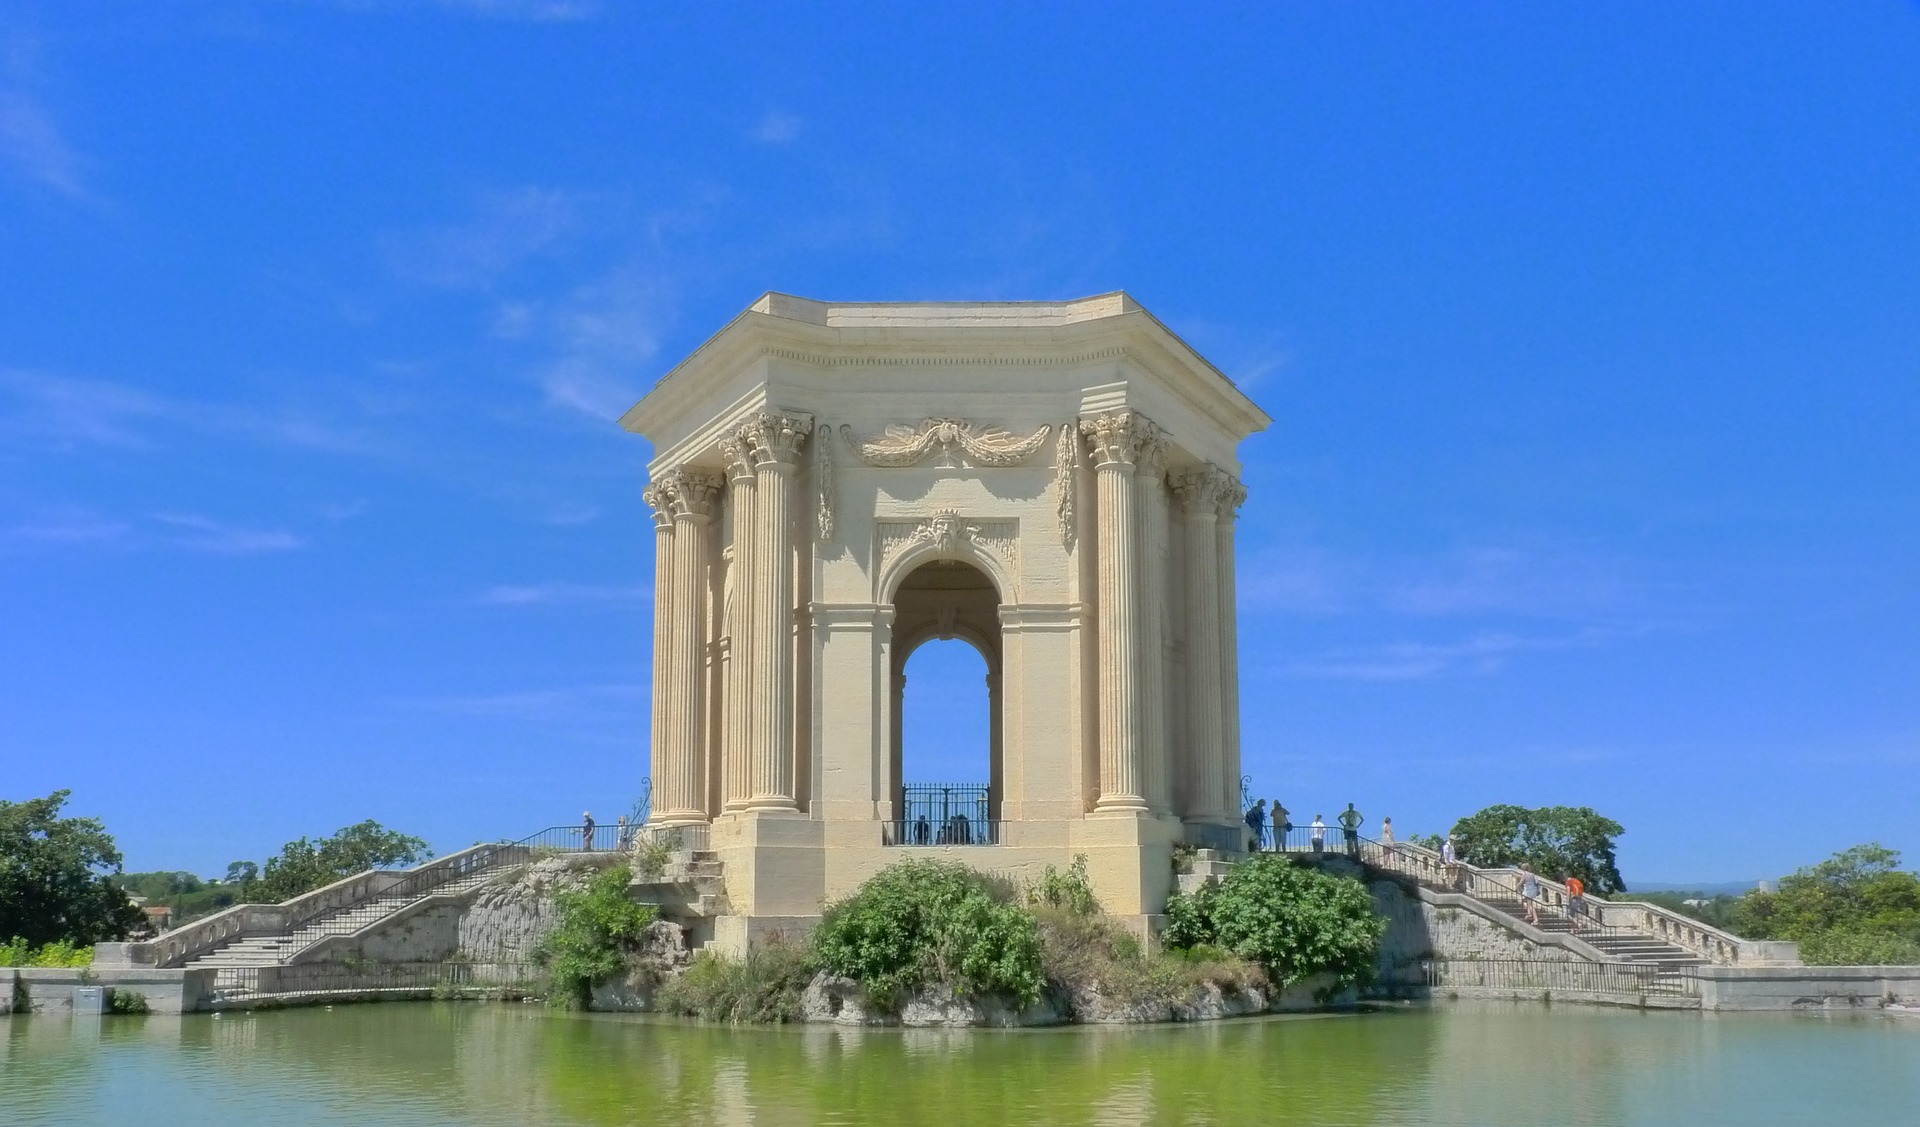 A big, arched structure over a small pond at a park in Montpellier